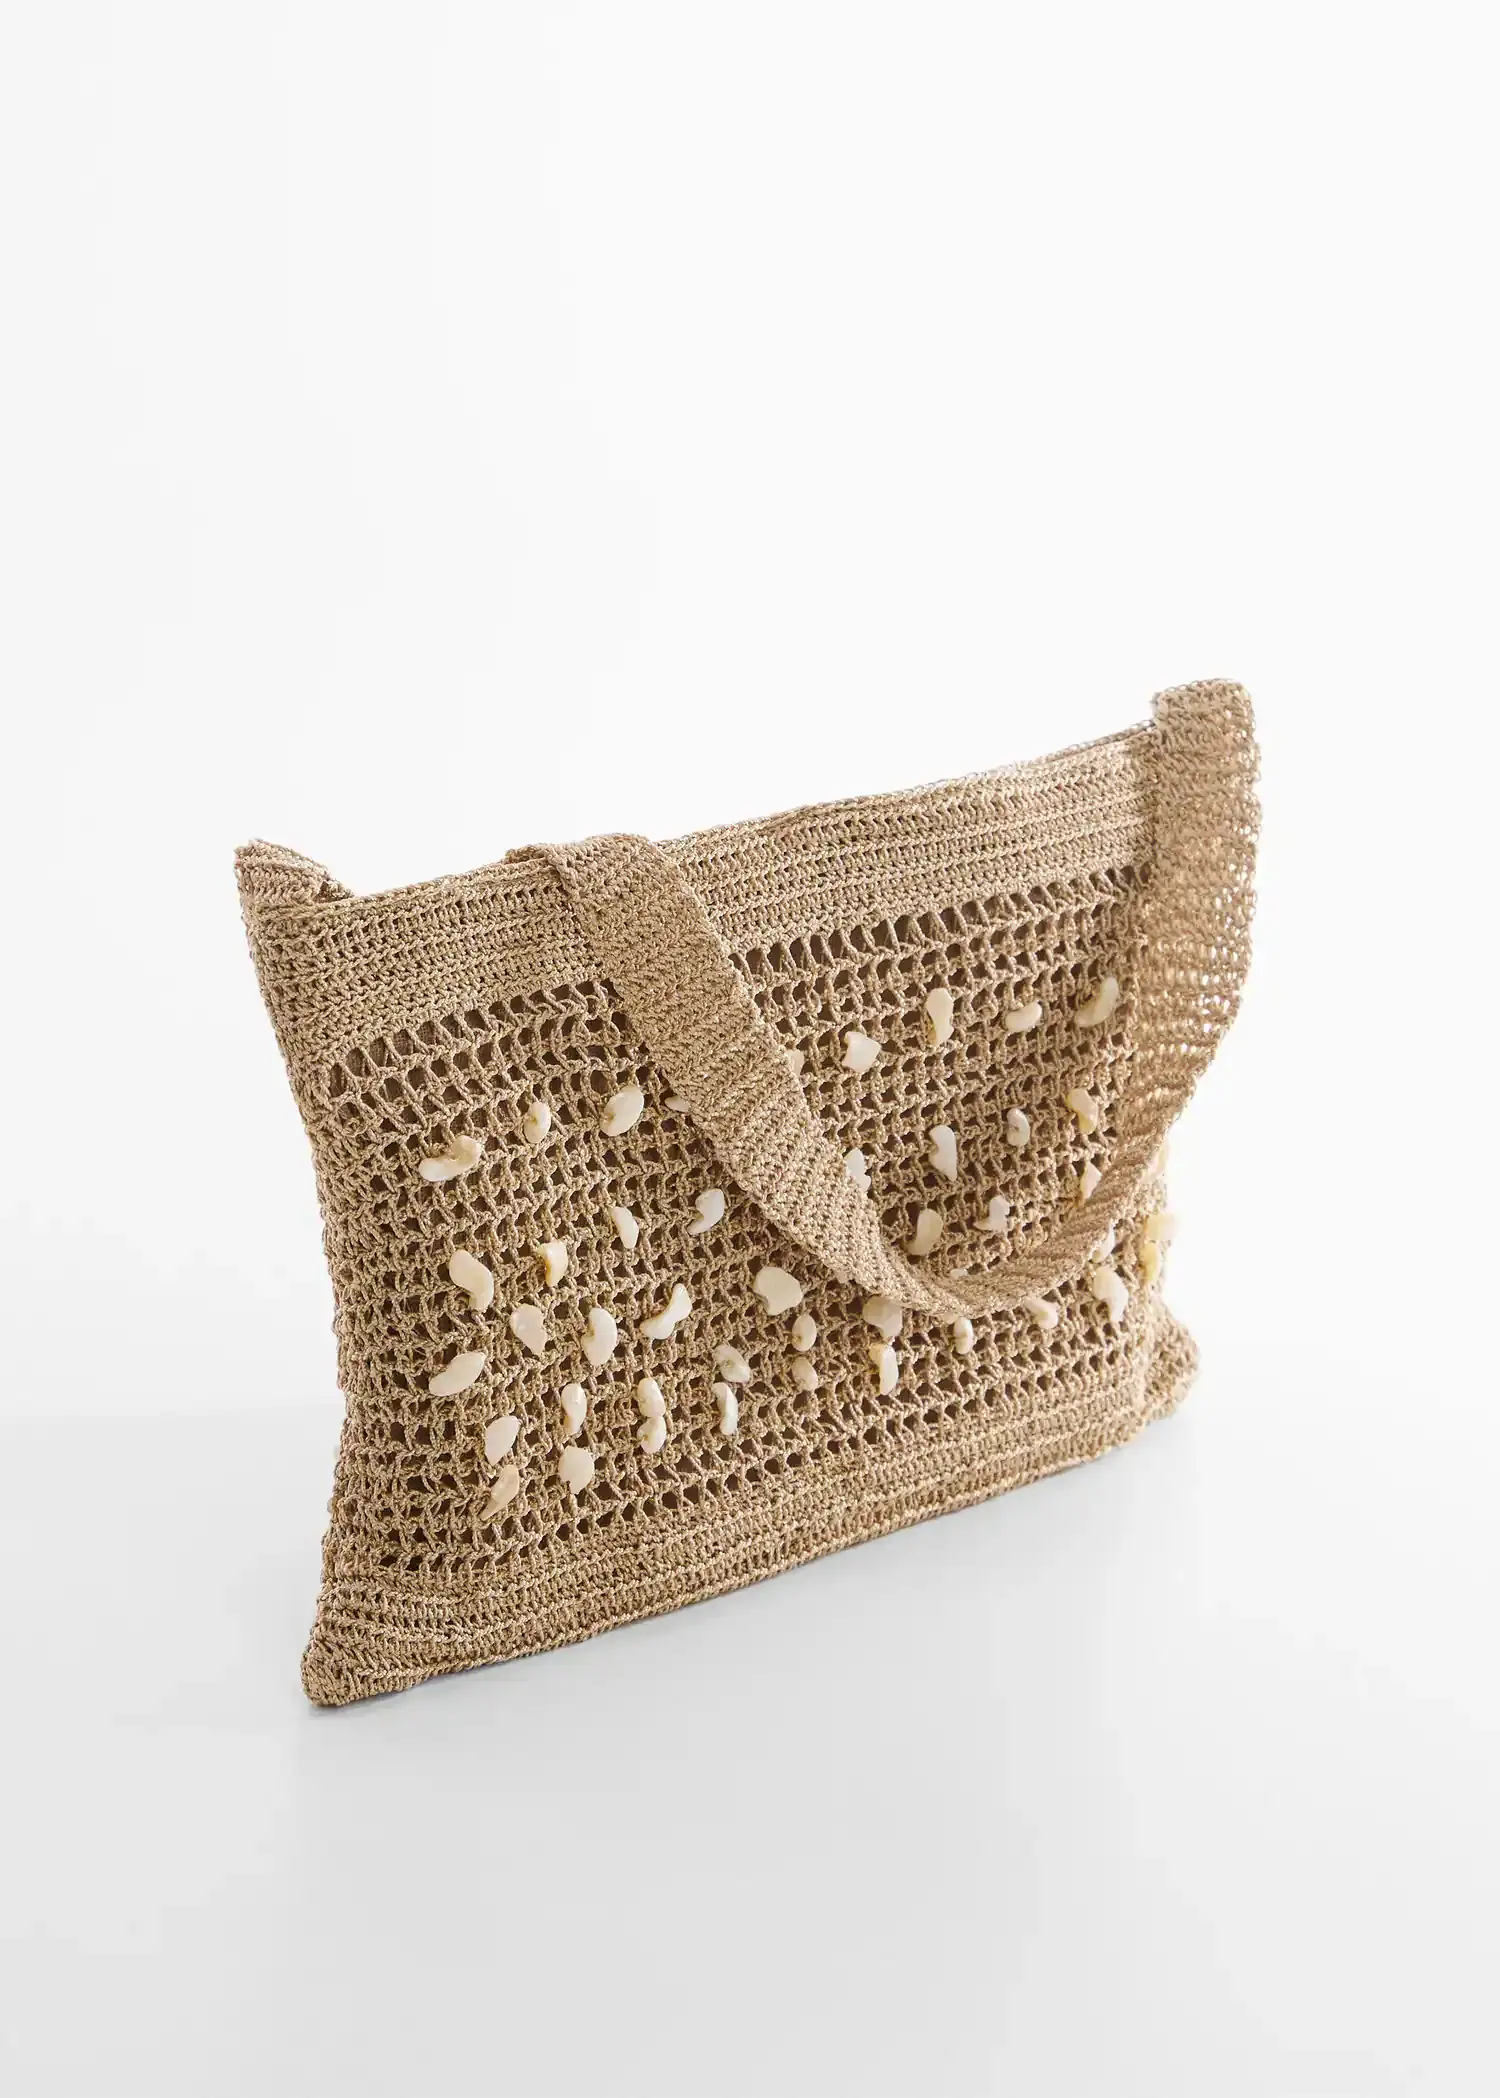 Mango Crochet bag with shell detail. a crocheted bag is shown on a table. 